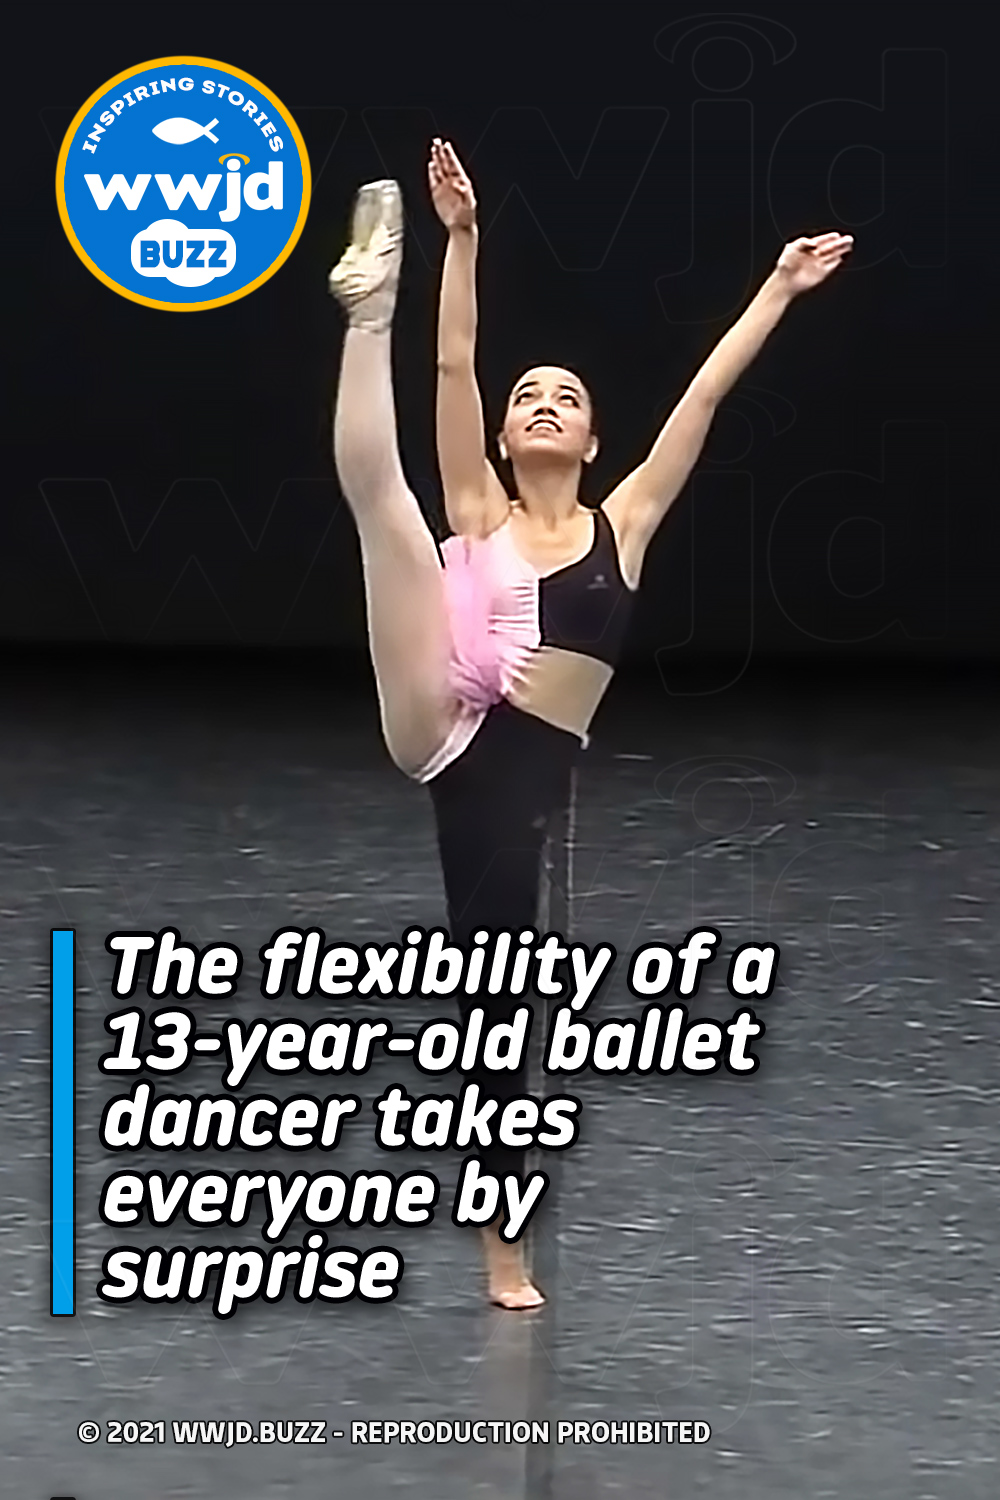 The flexibility of a 13-year-old ballet dancer takes everyone by surprise